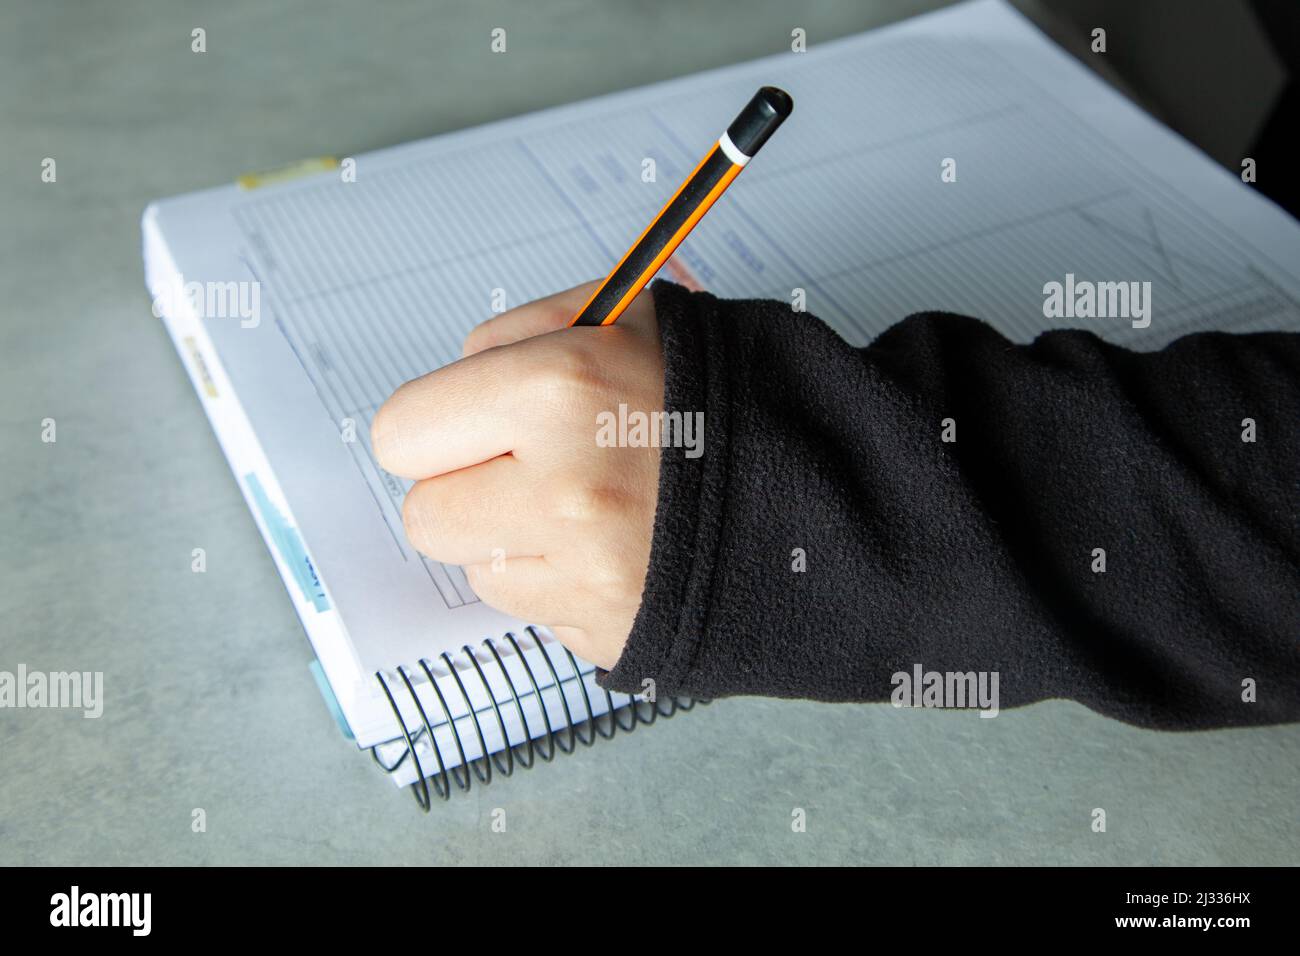 Woman writing in a notebook with a pen Stock Photo